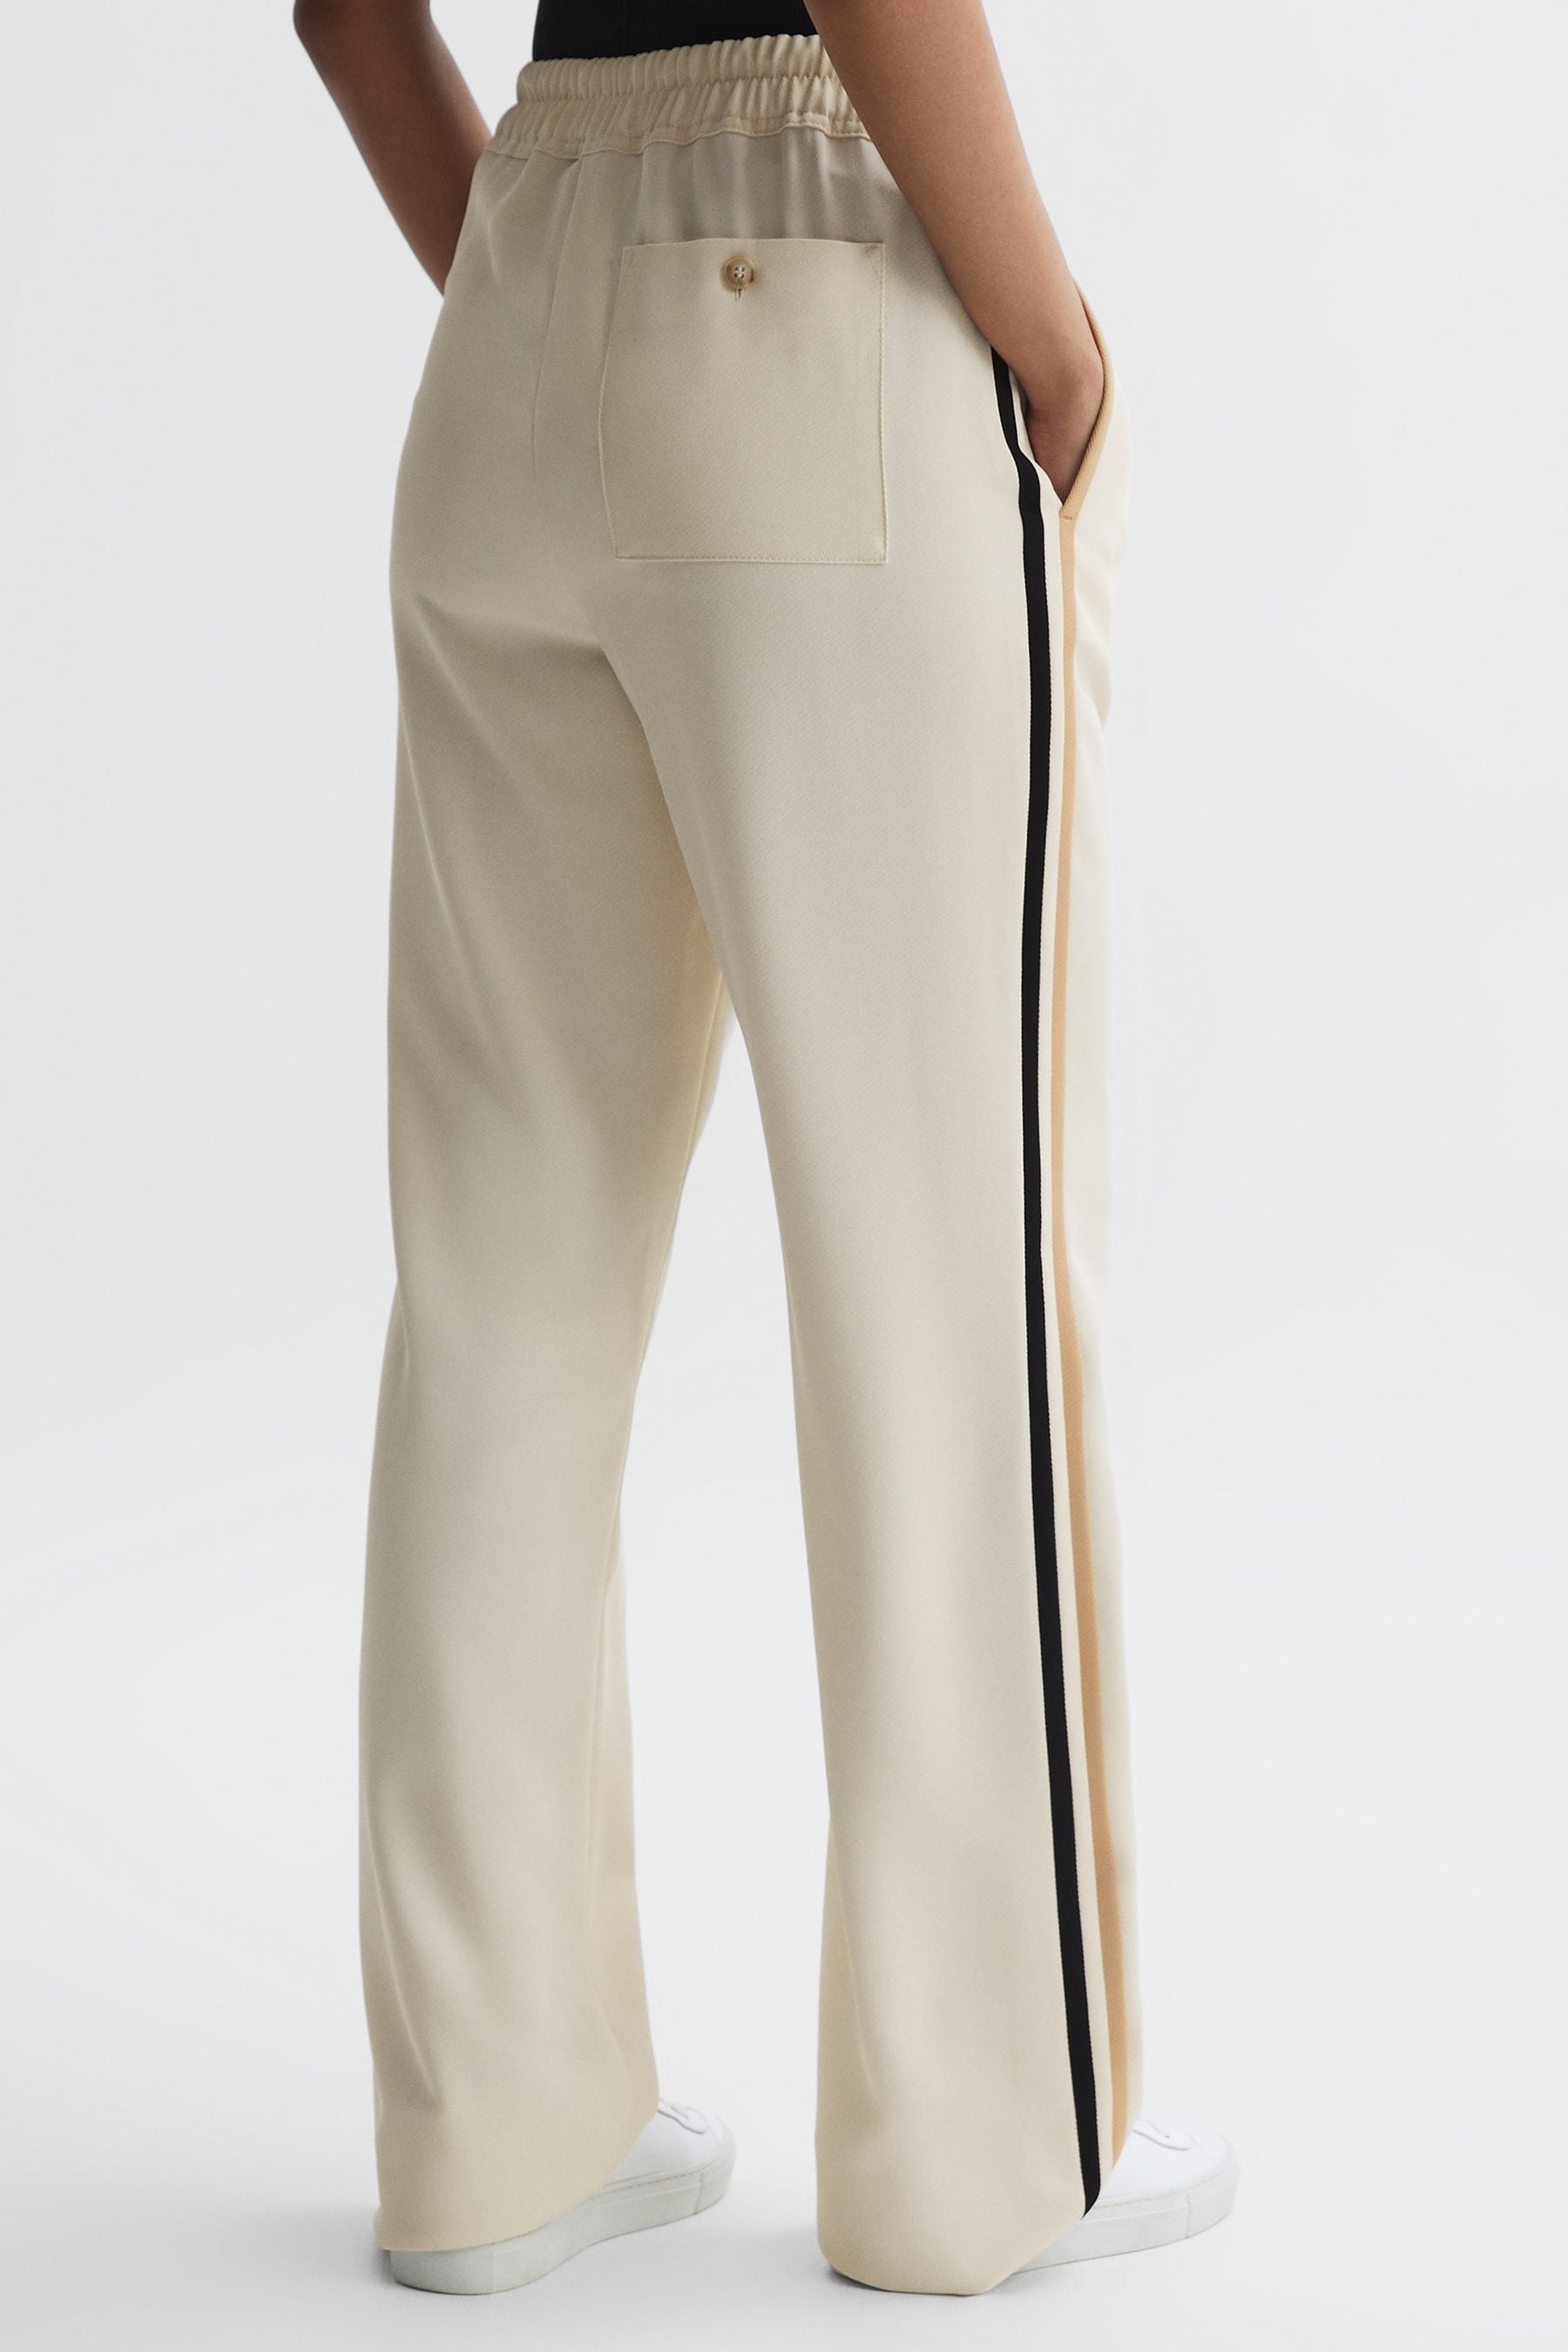 Buy Reiss Cream Odell Wide Leg Pull On Trousers from the Next UK online ...